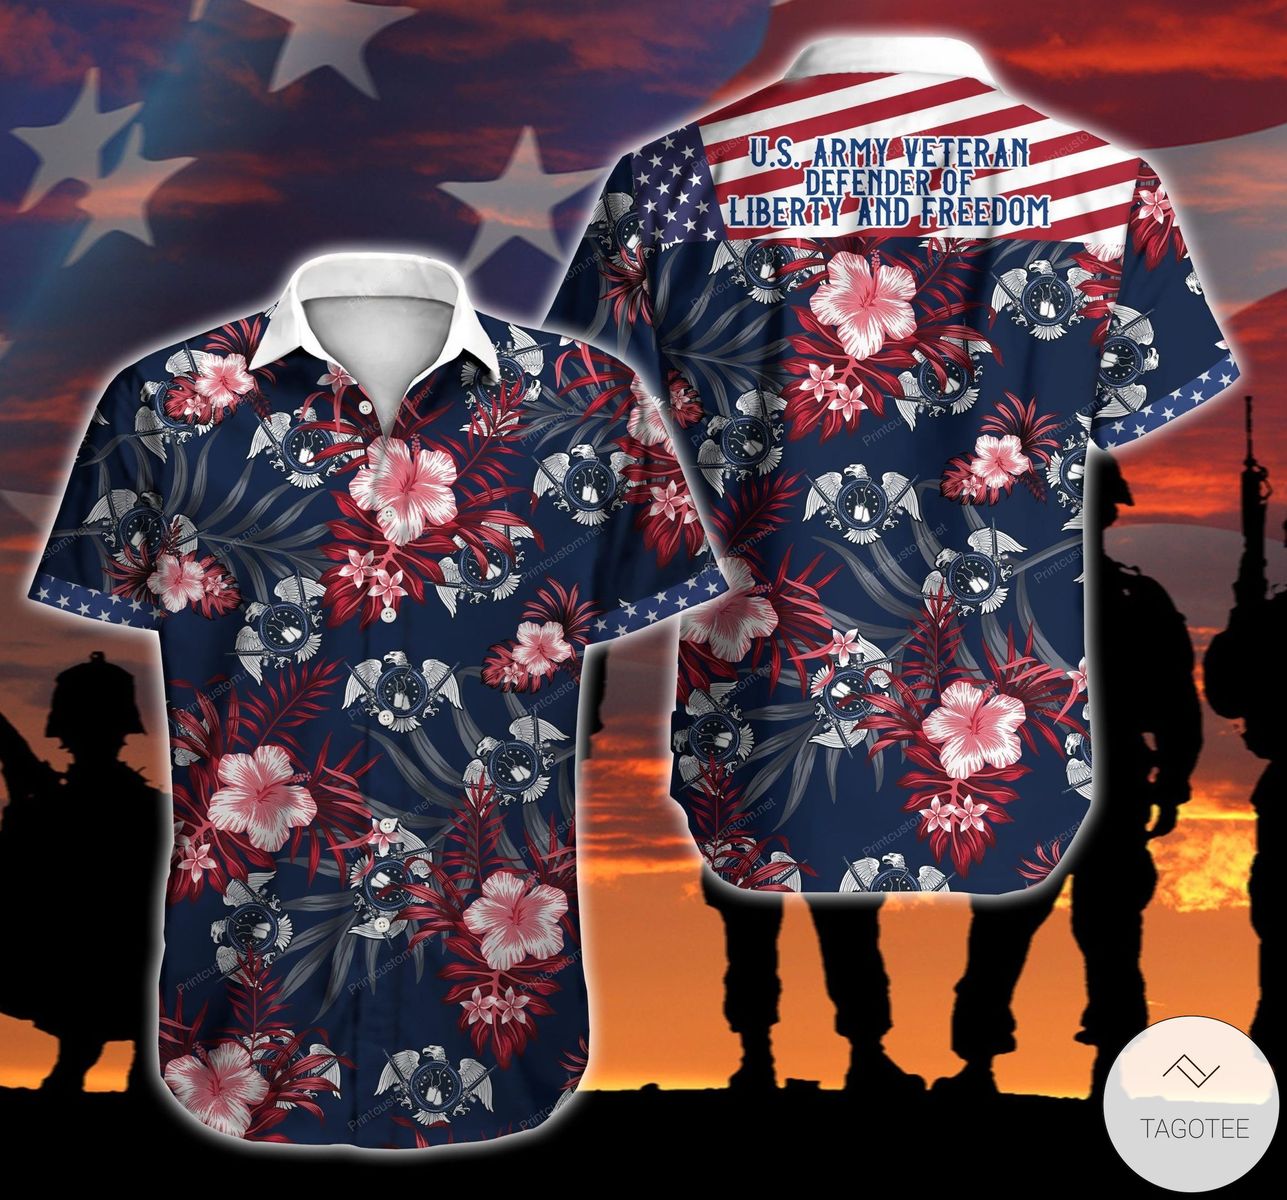 American US Army Veteran Defender Of Liberty And Freedom Button Shirt – TAGOTEE